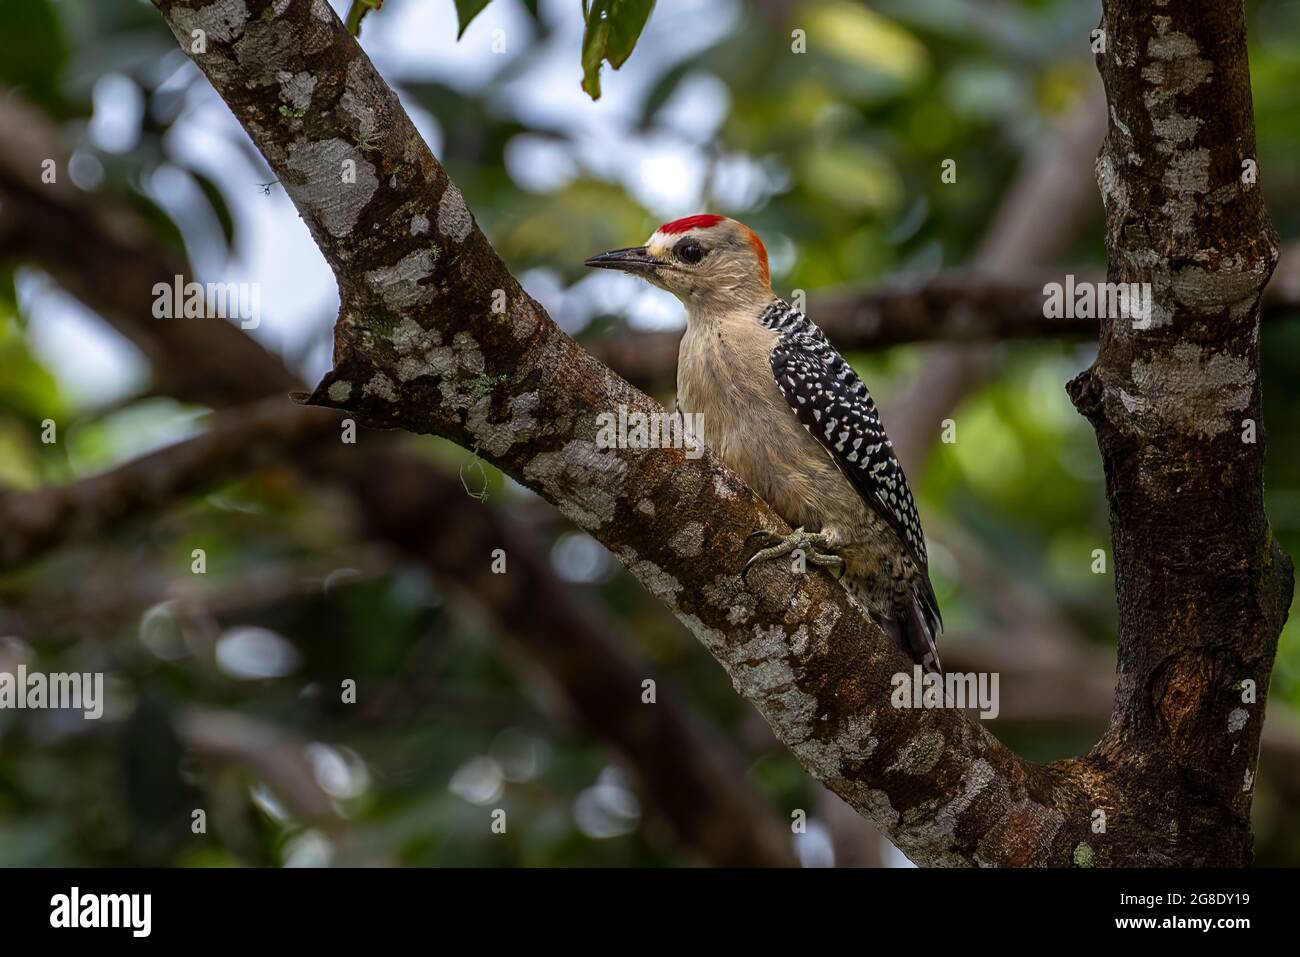 Red crowned woodpecker perched on a tree image taken in Panama Stock Photo